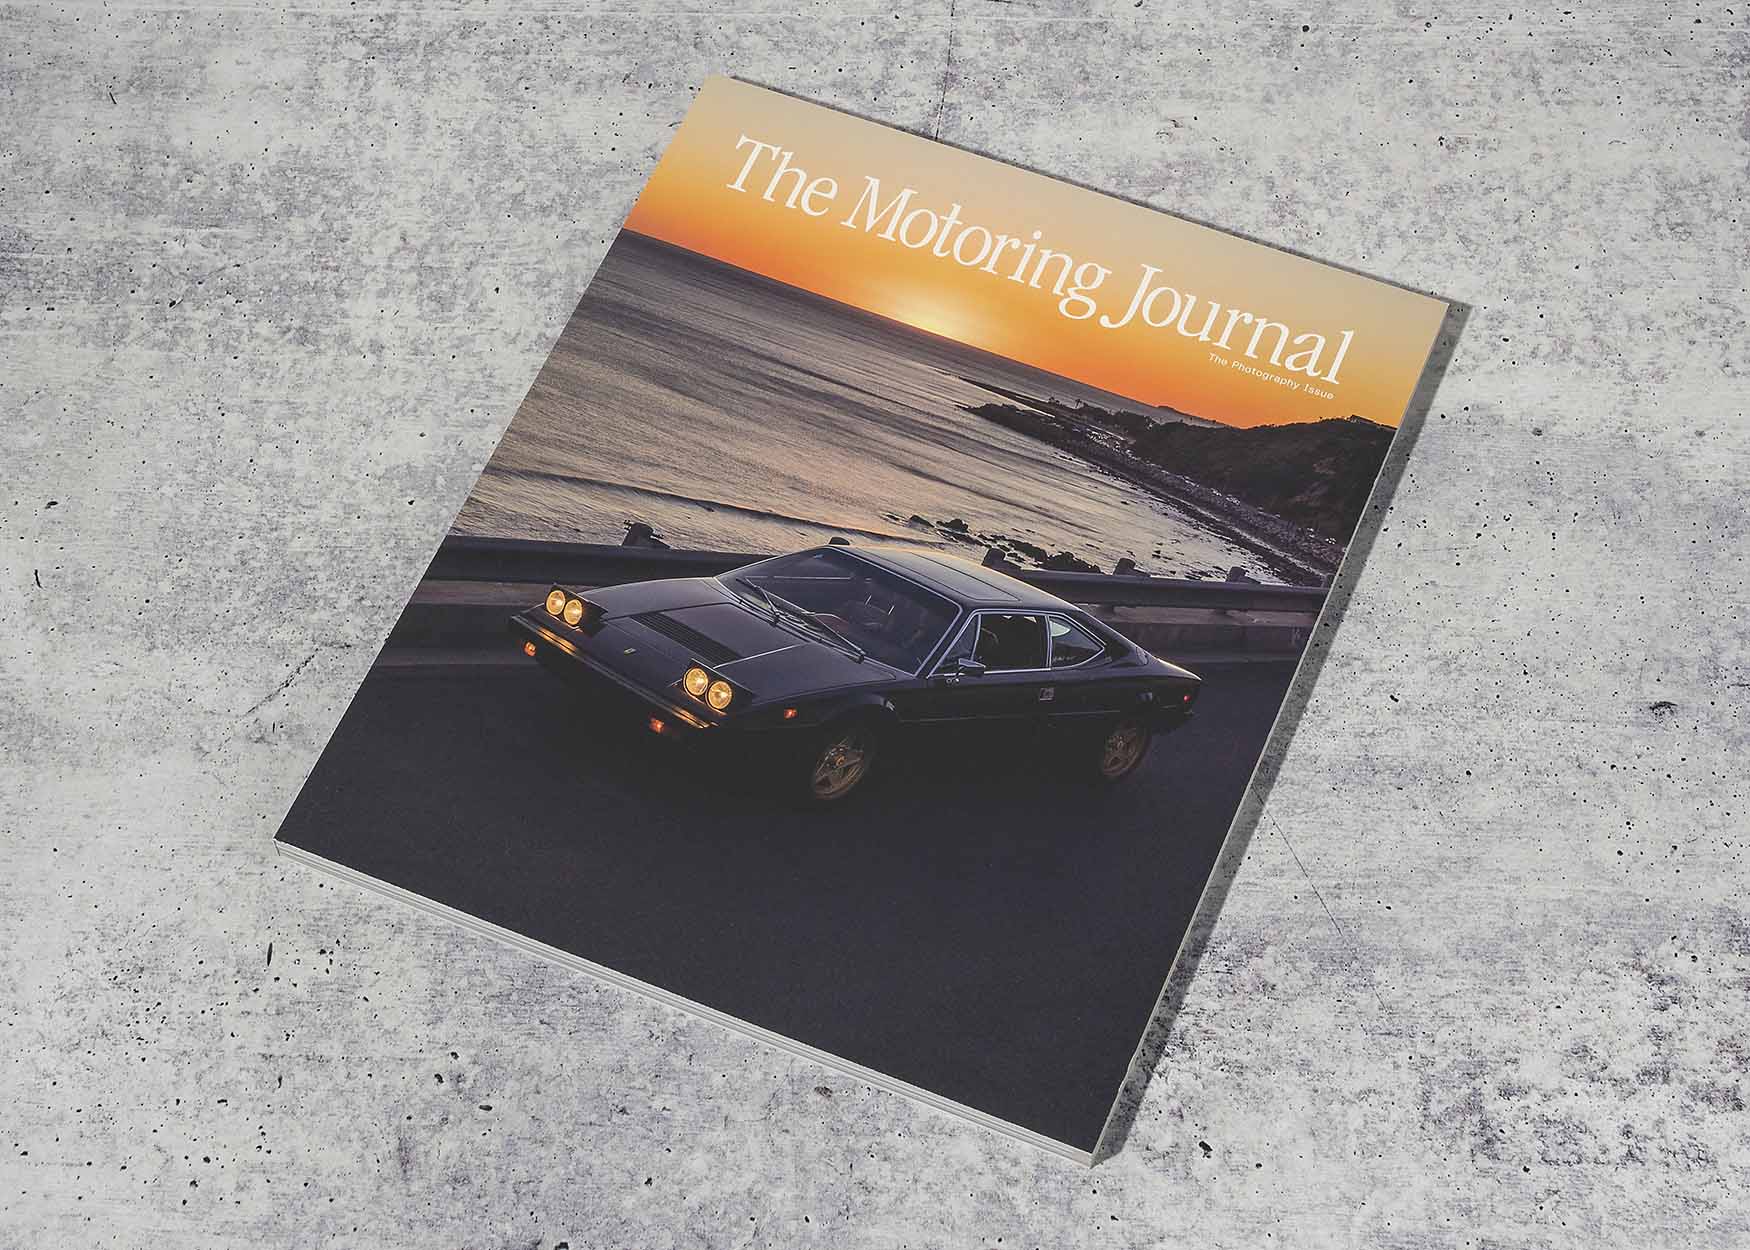 Cover of The Motoring Journal magazine